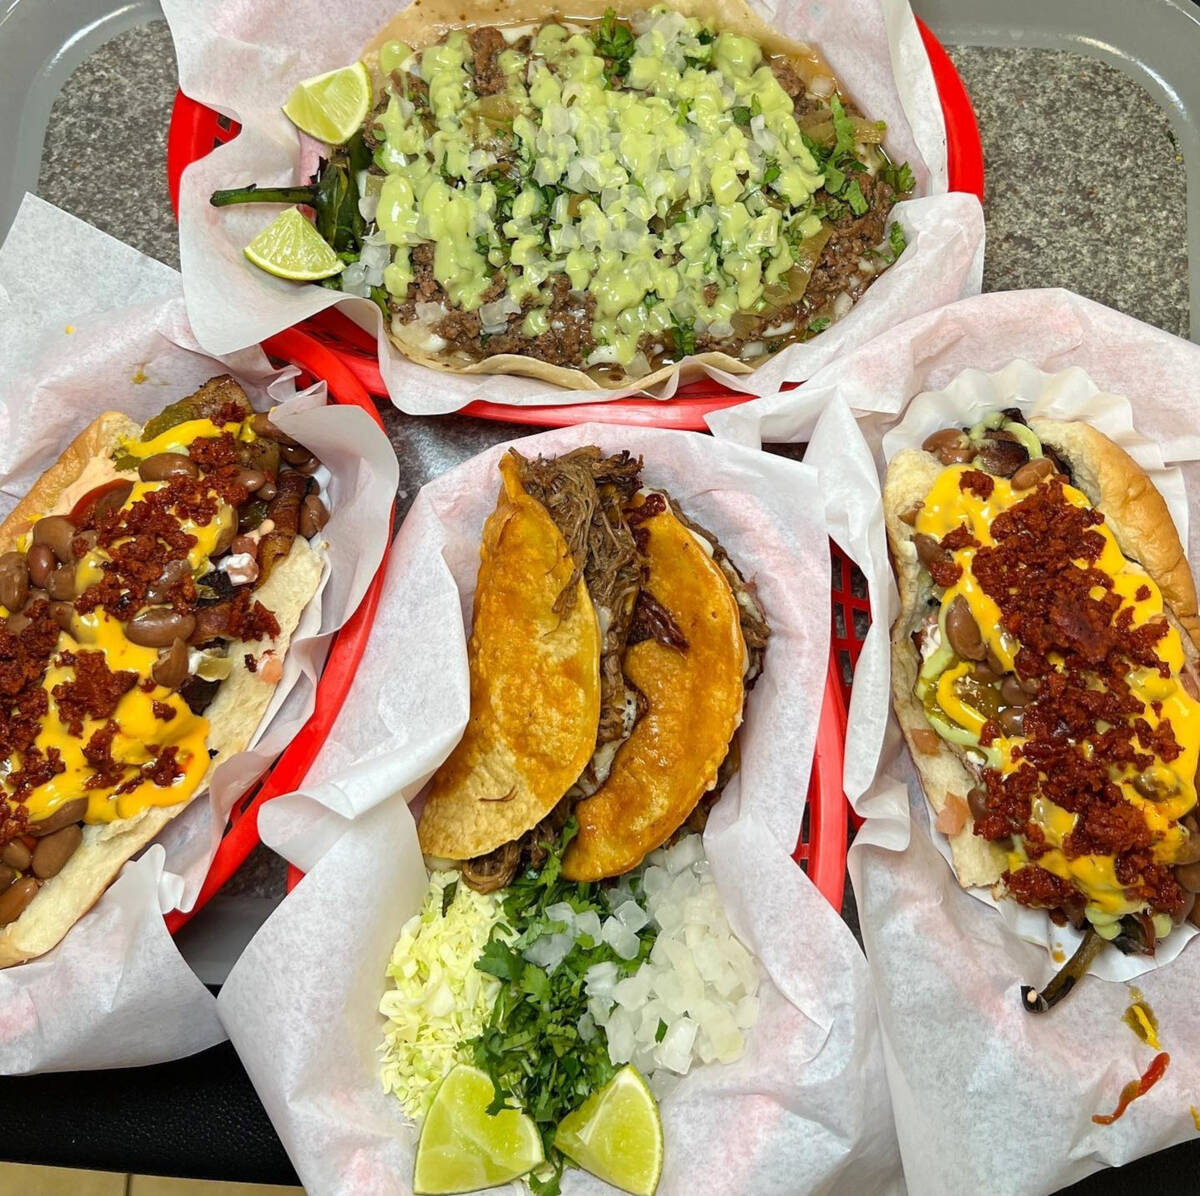 Sonoran-style hot dogs, left and right, a Sonoran-style dog wrapped in a tortilla instead of a ...